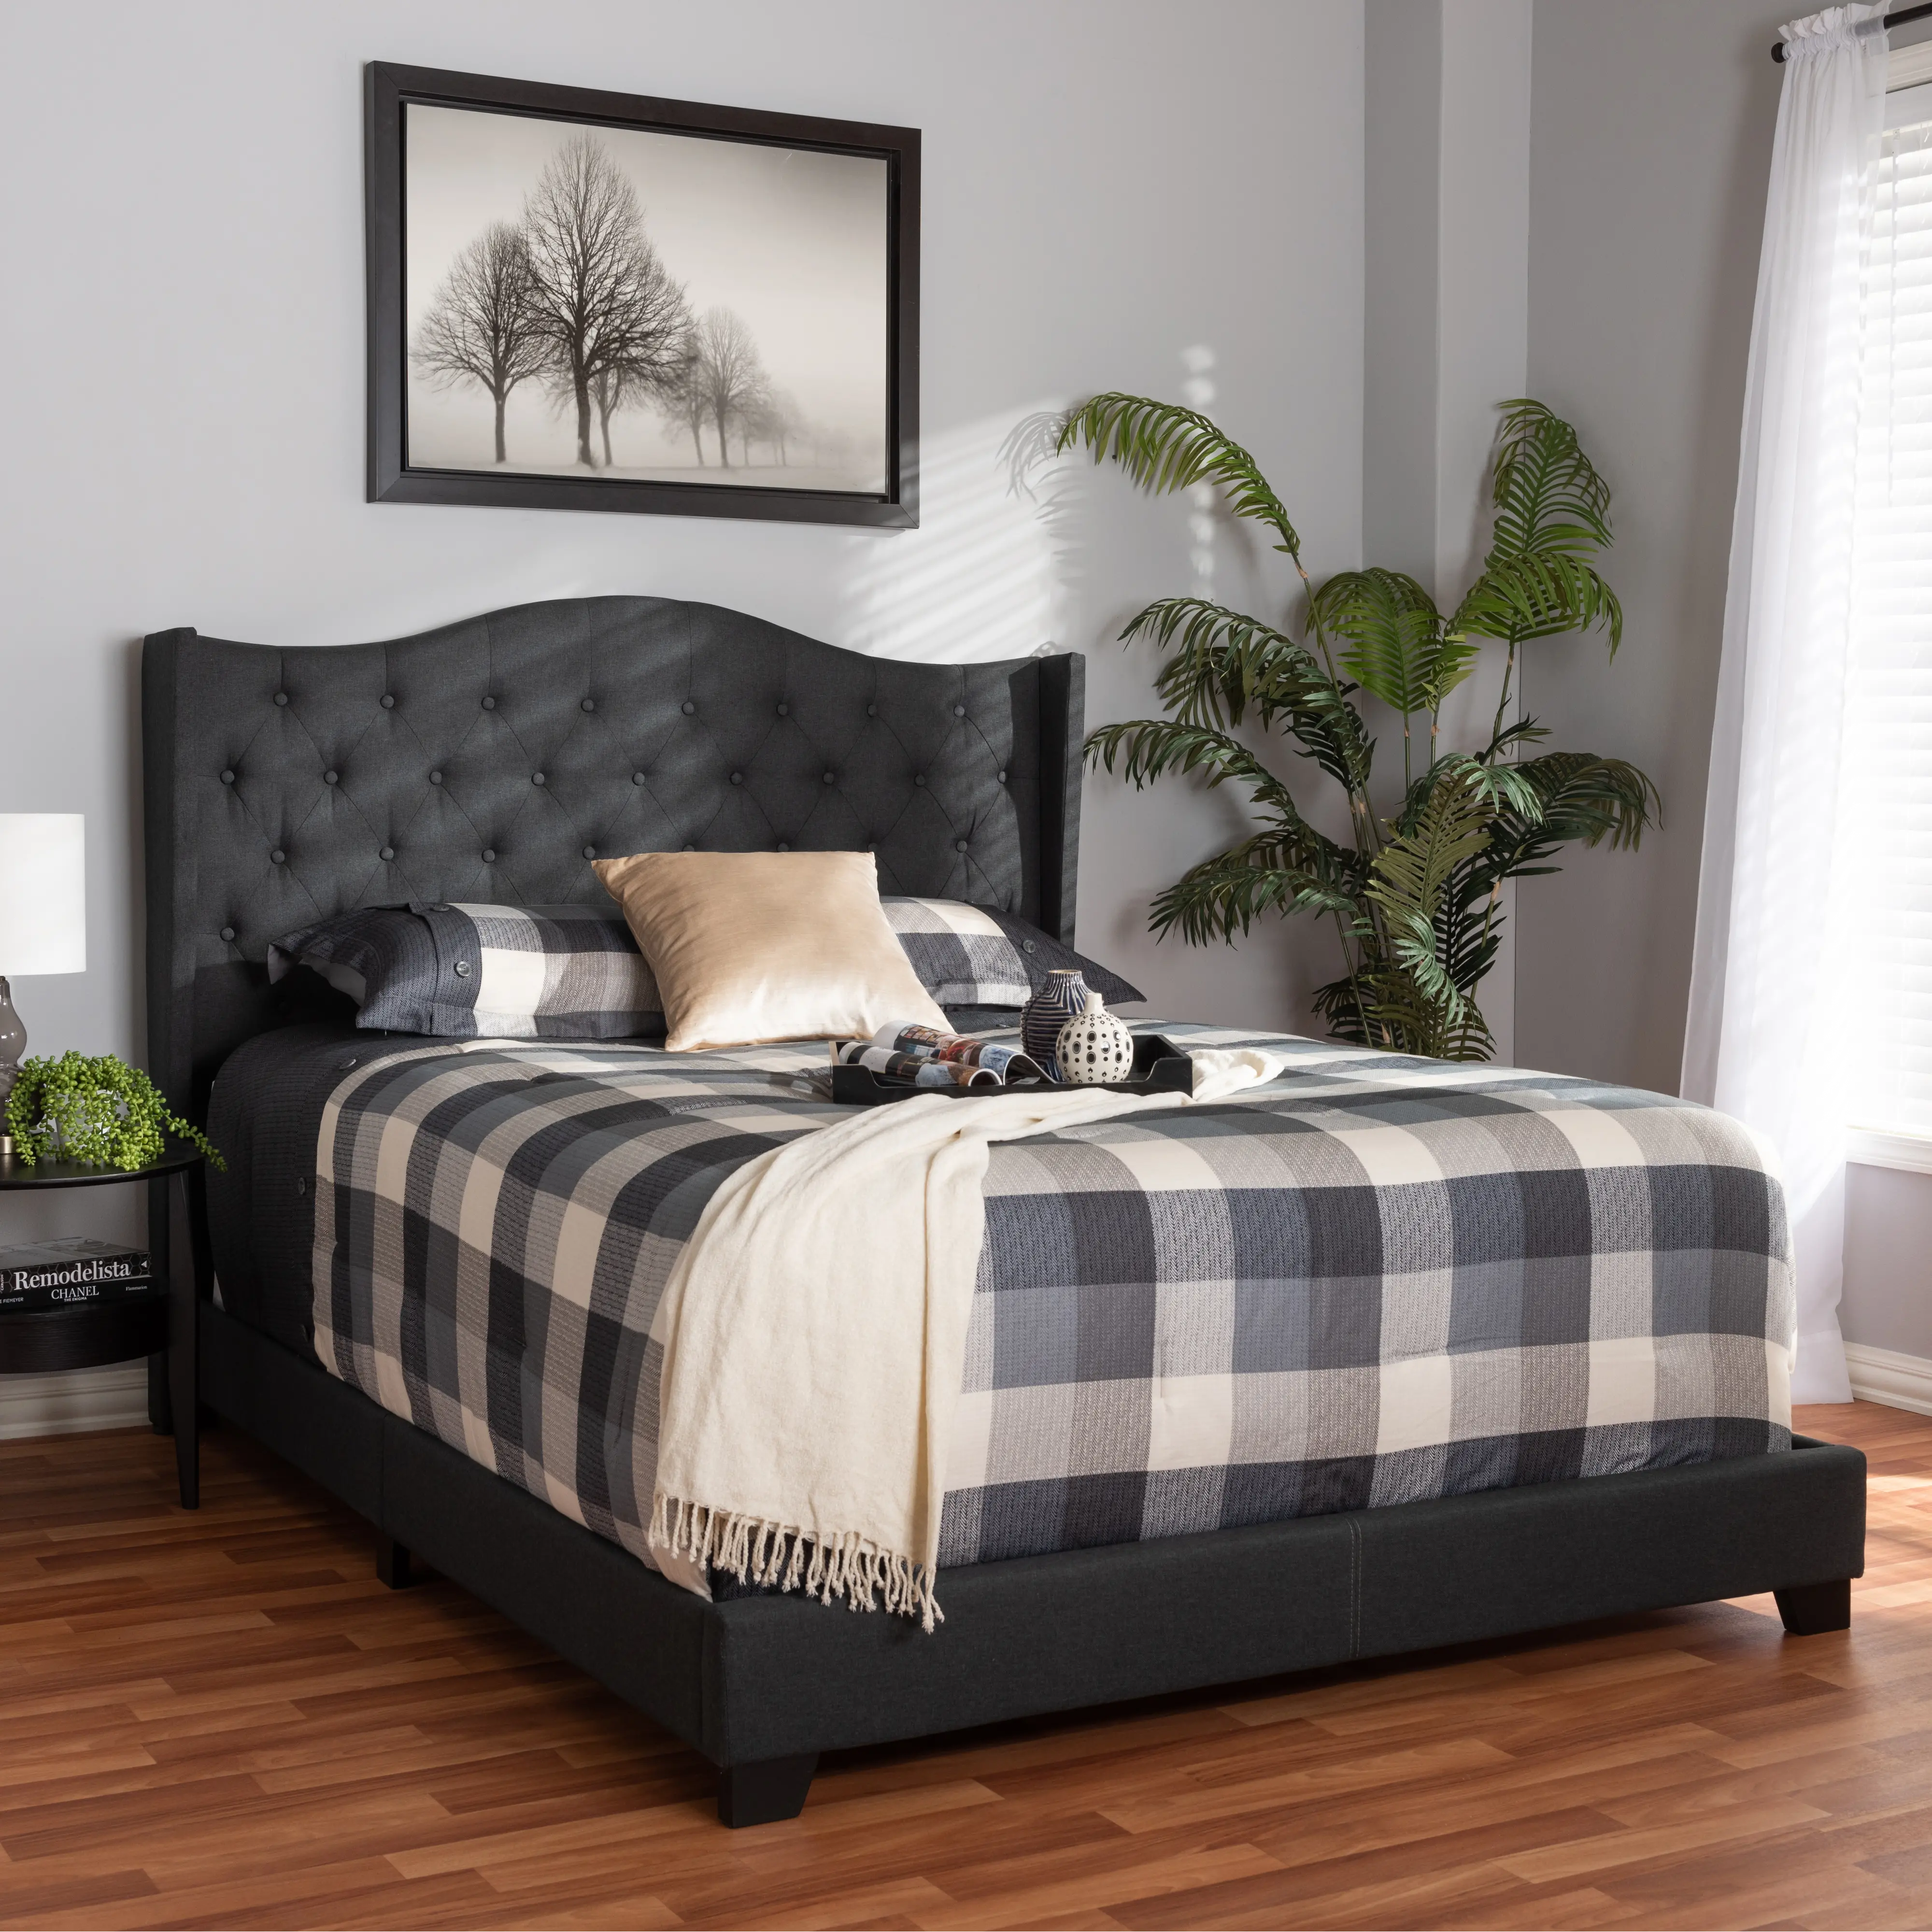 149-8932-RCW Contemporary Charcoal Gray Upholstered Full Bed -  sku 149-8932-RCW